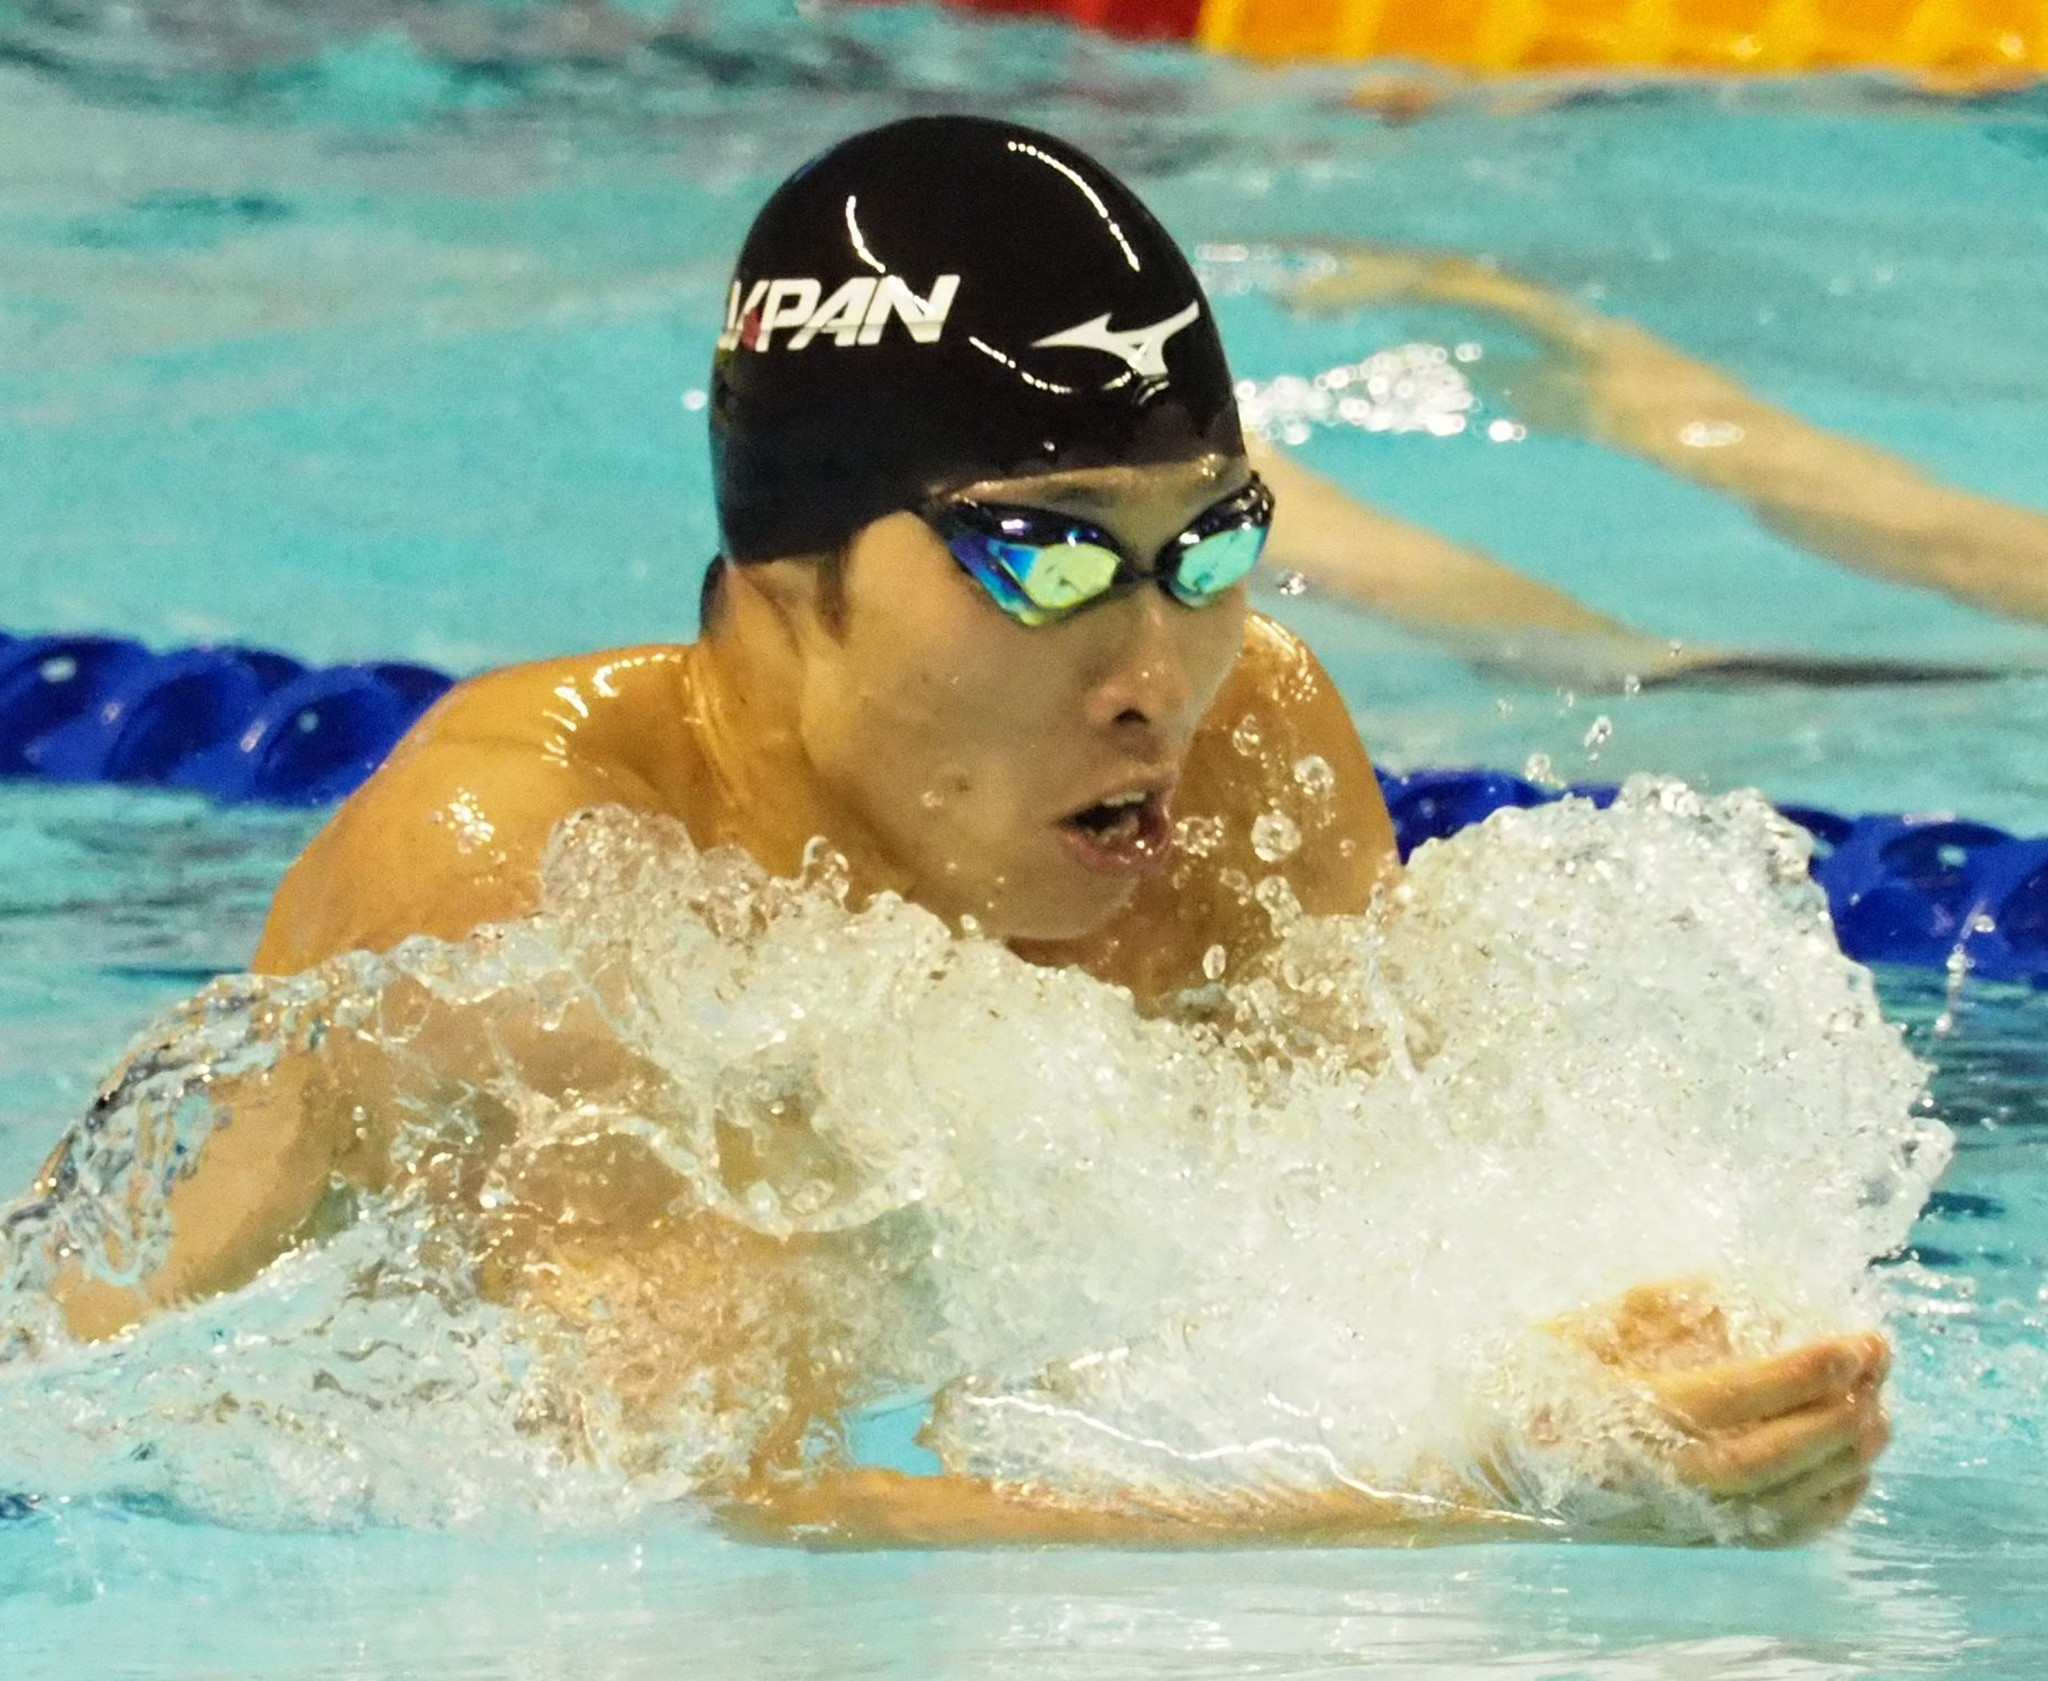 Kosuke Hagino won one of Japan's two gold medals in swimming ©Taipei 2017